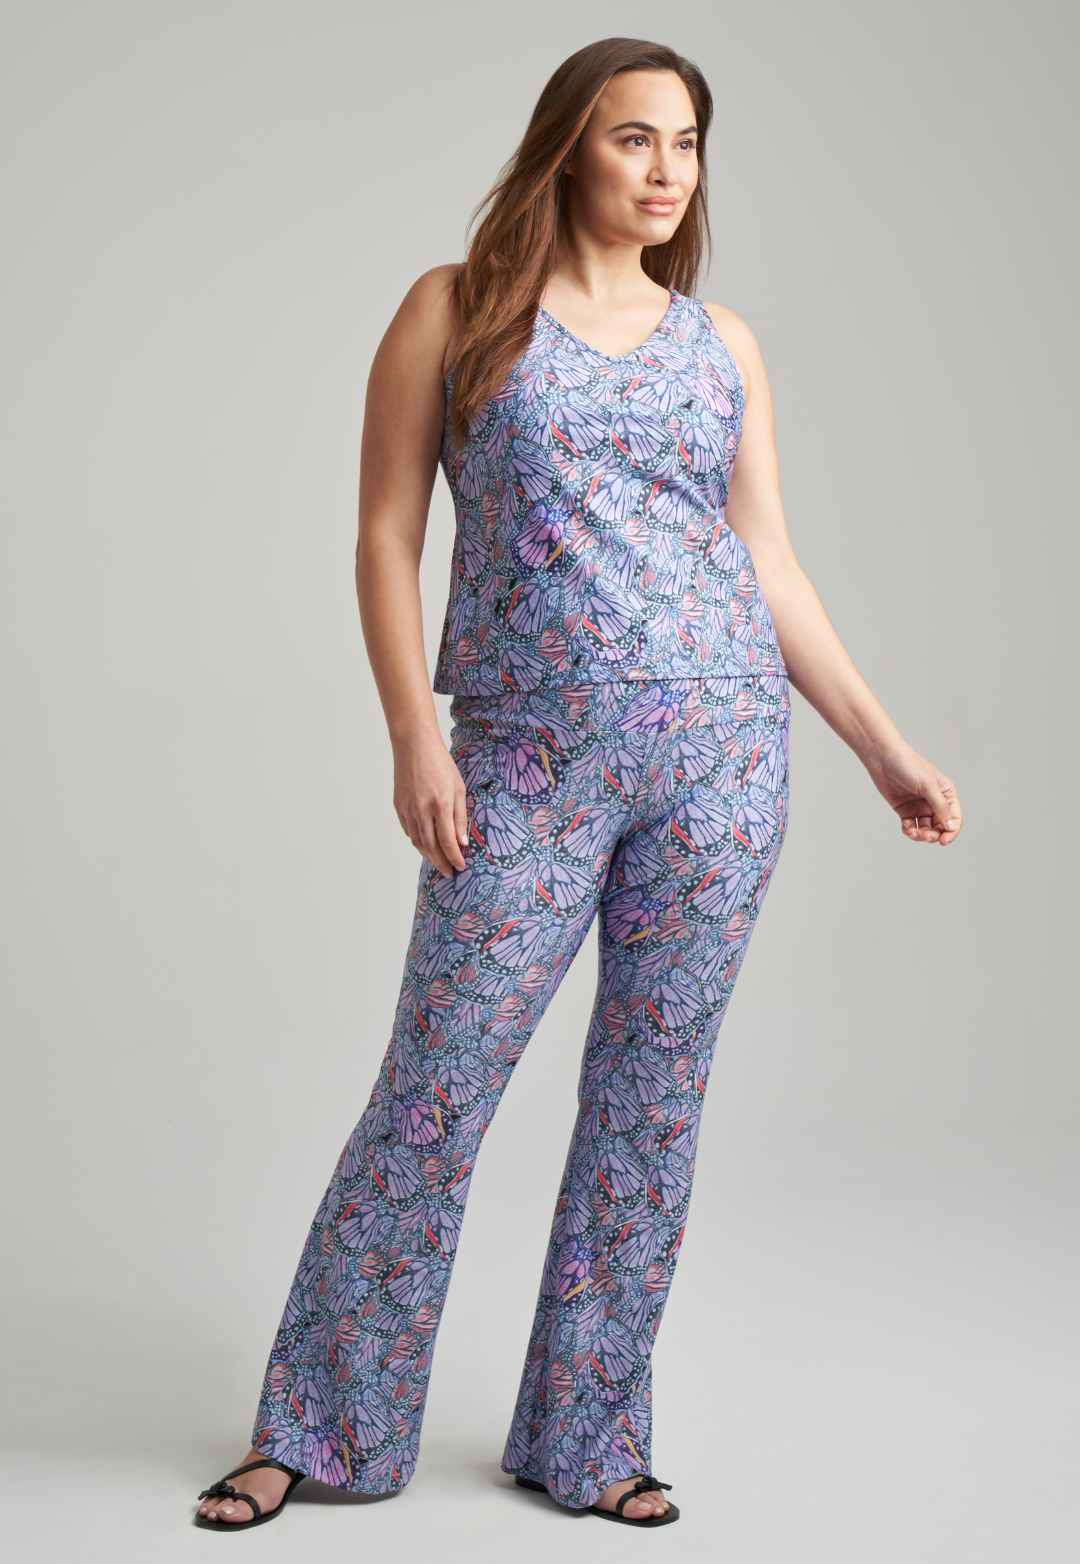 Woman wearing butterfly printed stretch knit purple pants with butterfly printed purple stretch knit tank top by Ala von Auersperg for spring summer 2021